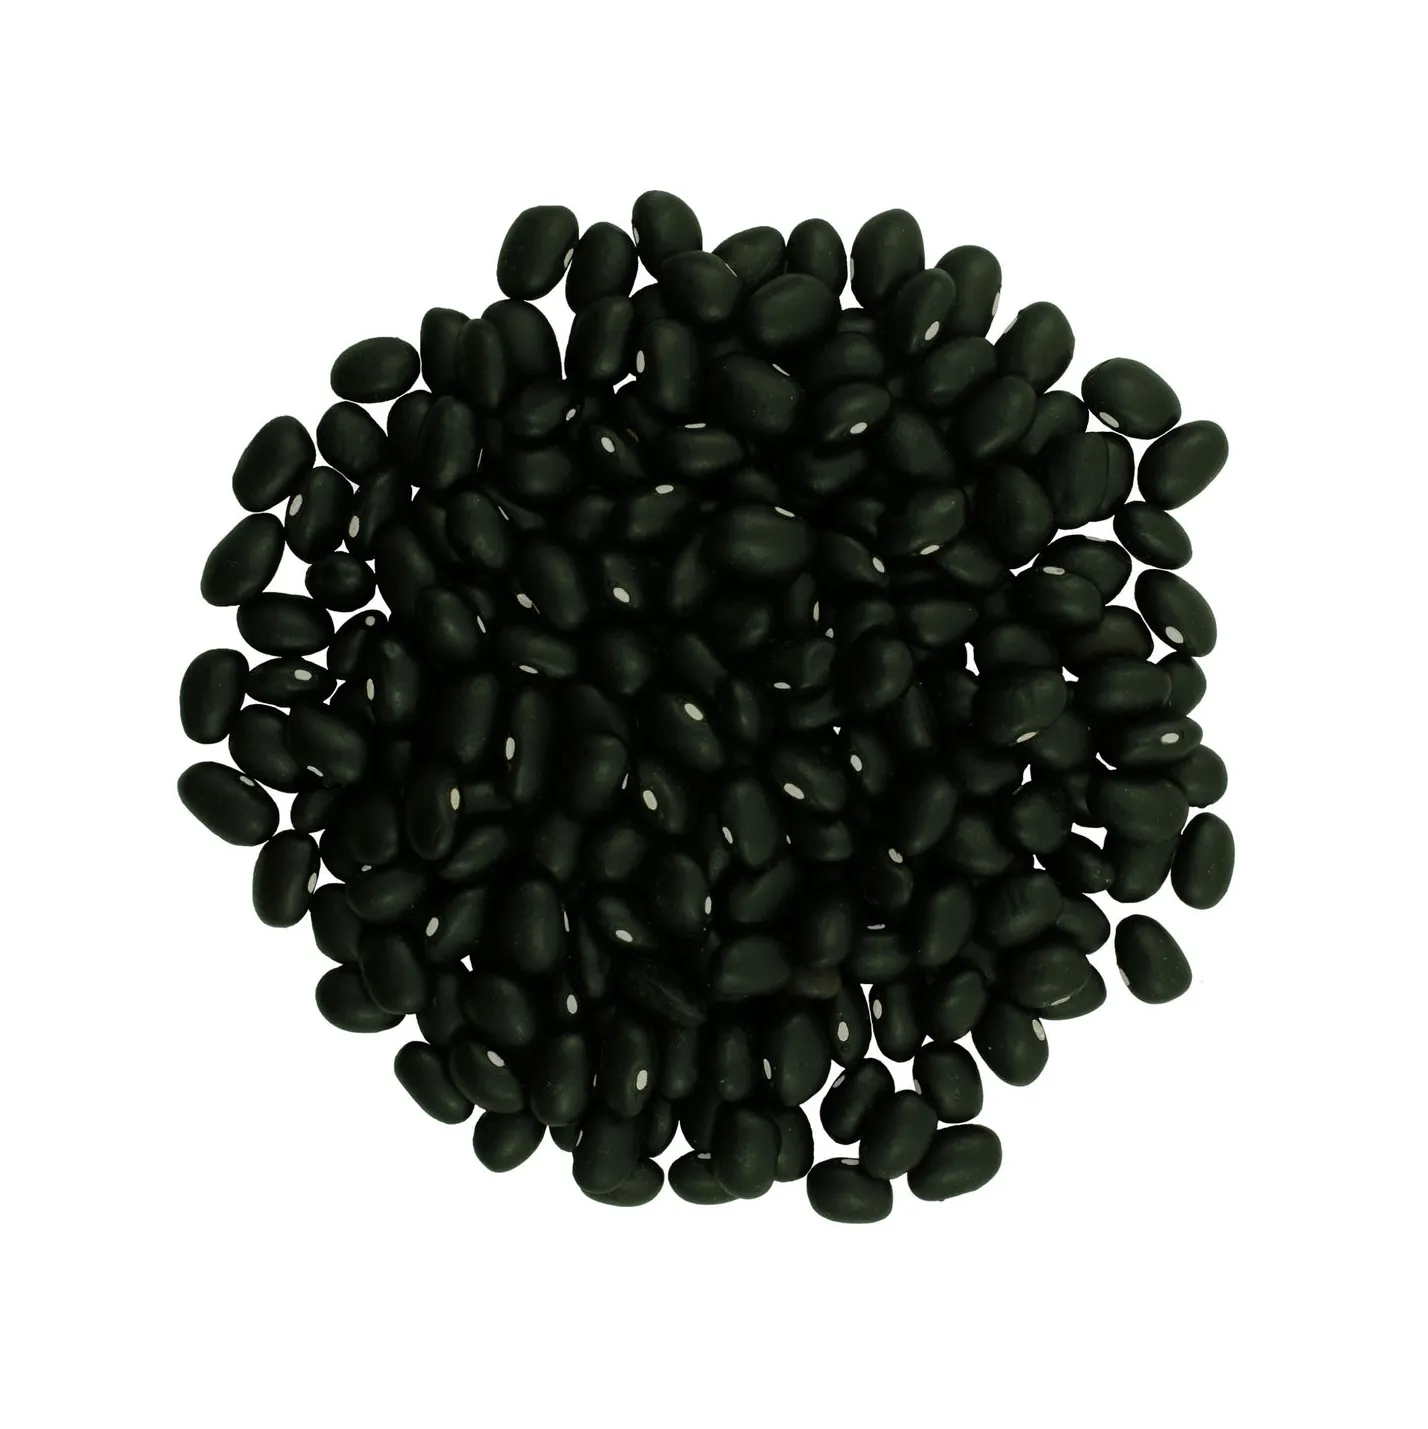 2023 Red Kidney Beans Wholesale Dark Red Kidney Beans With Export Black Kidney Beans High Quality